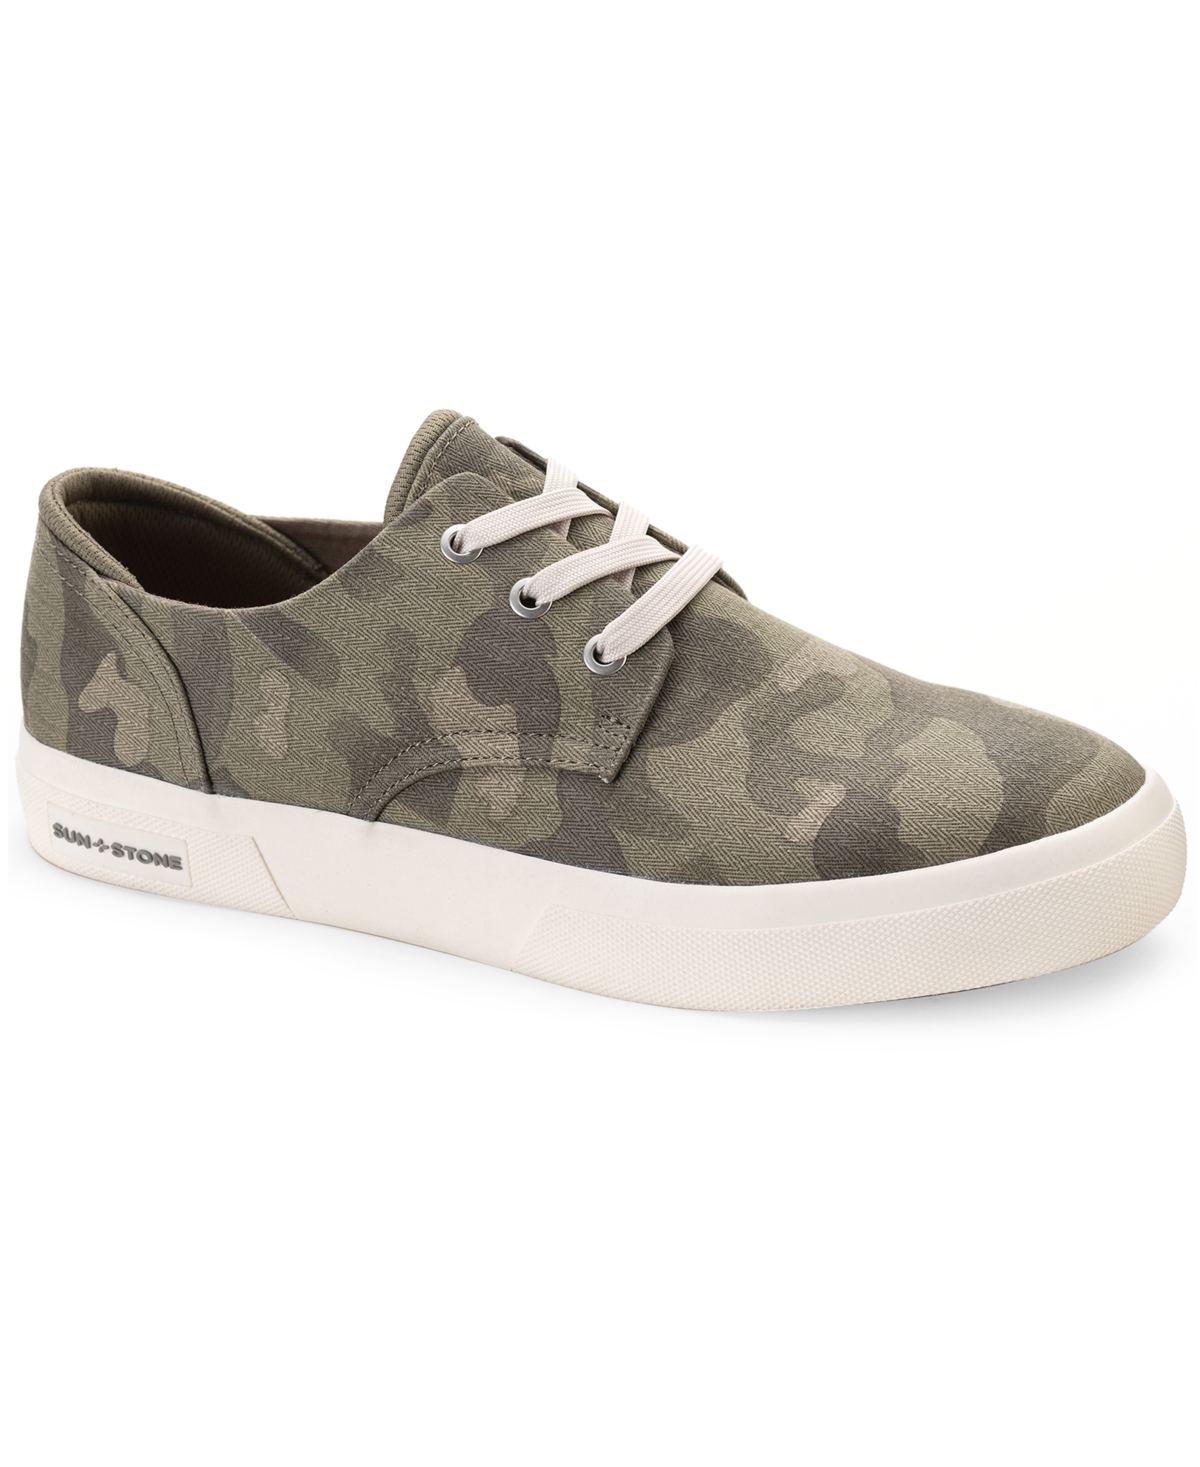 SUN + STONE MEN'S KIVA LACE-UP CORE SNEAKERS, CREATED FOR MACY'S MEN'S SHOES